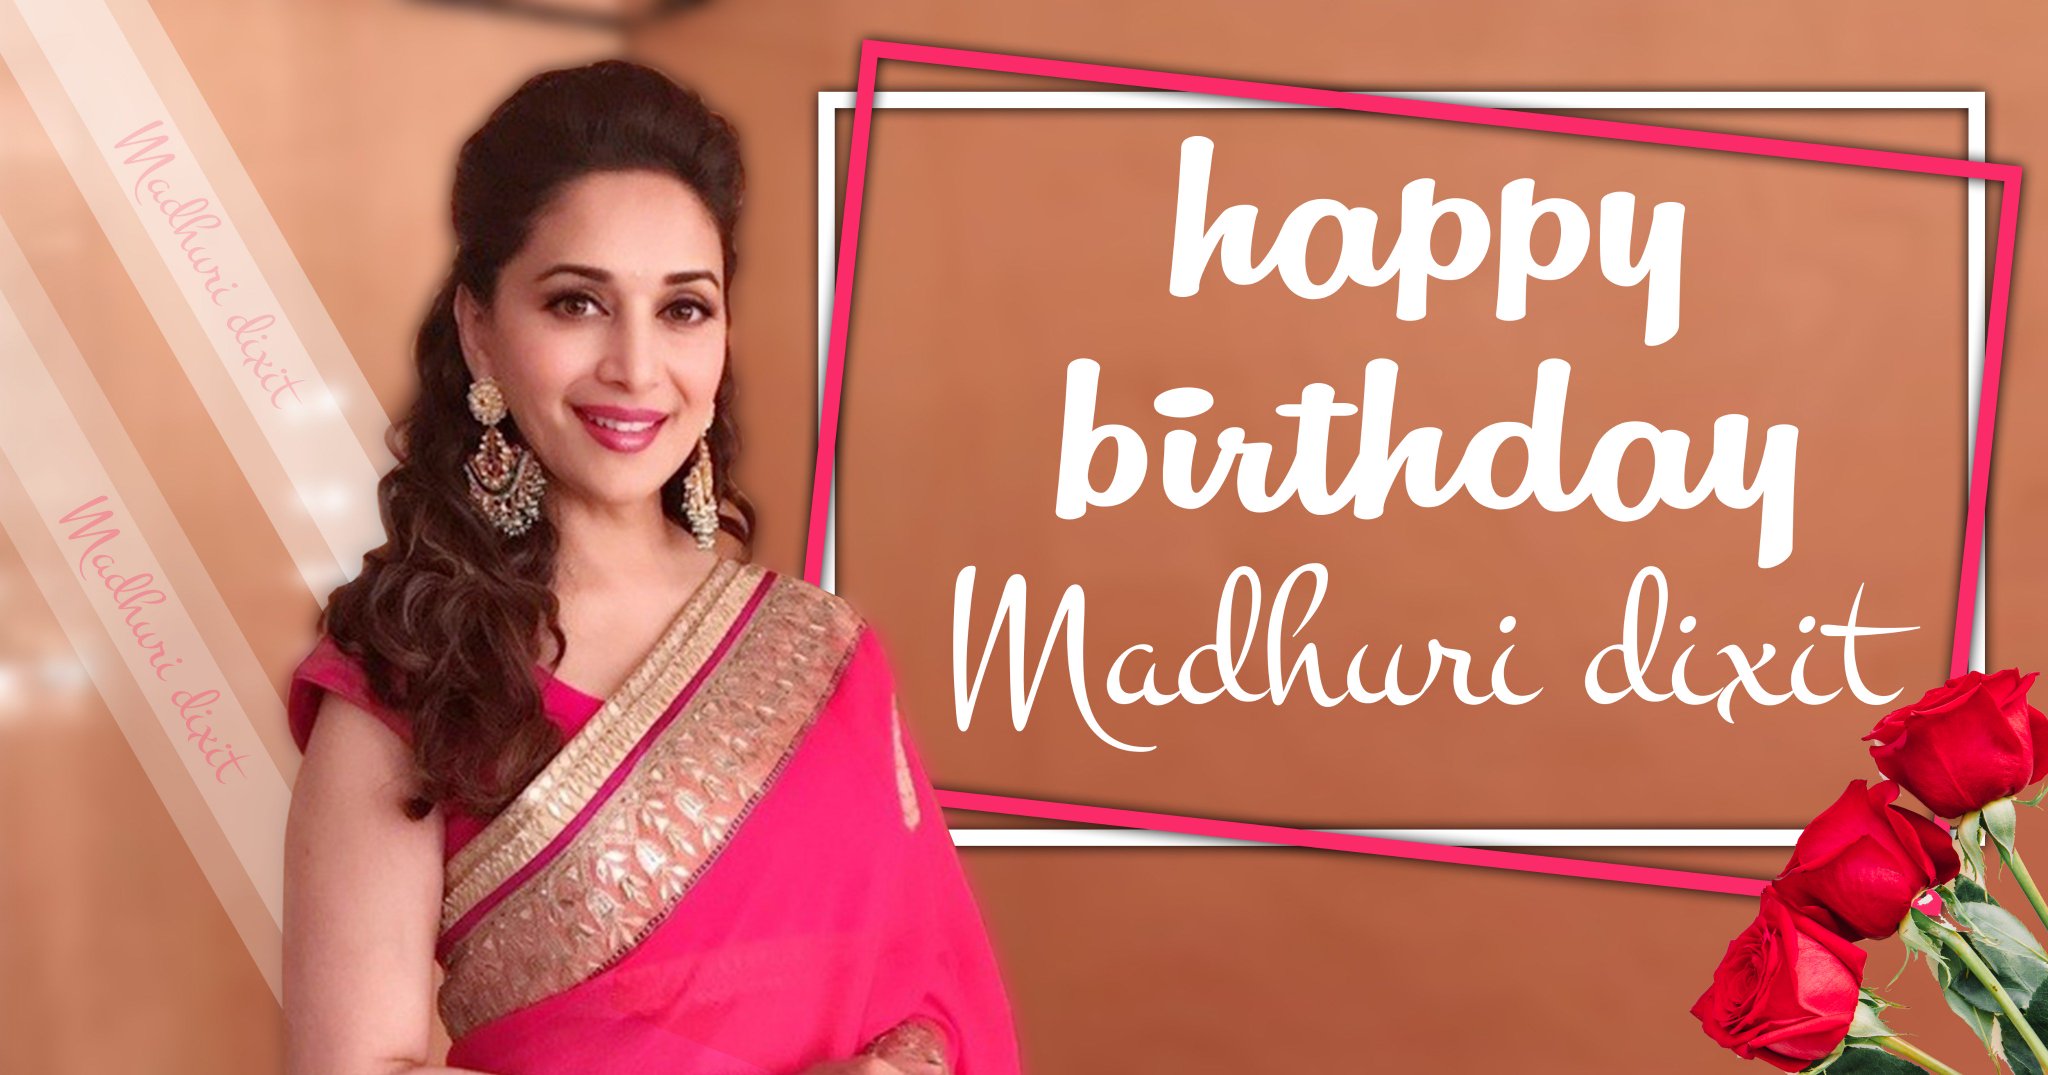 Happy Birthday to Dhak Dhak girl Madhuri Dixit from Go ProcessingLtd - The epitome of beauty, elegance & grace. 